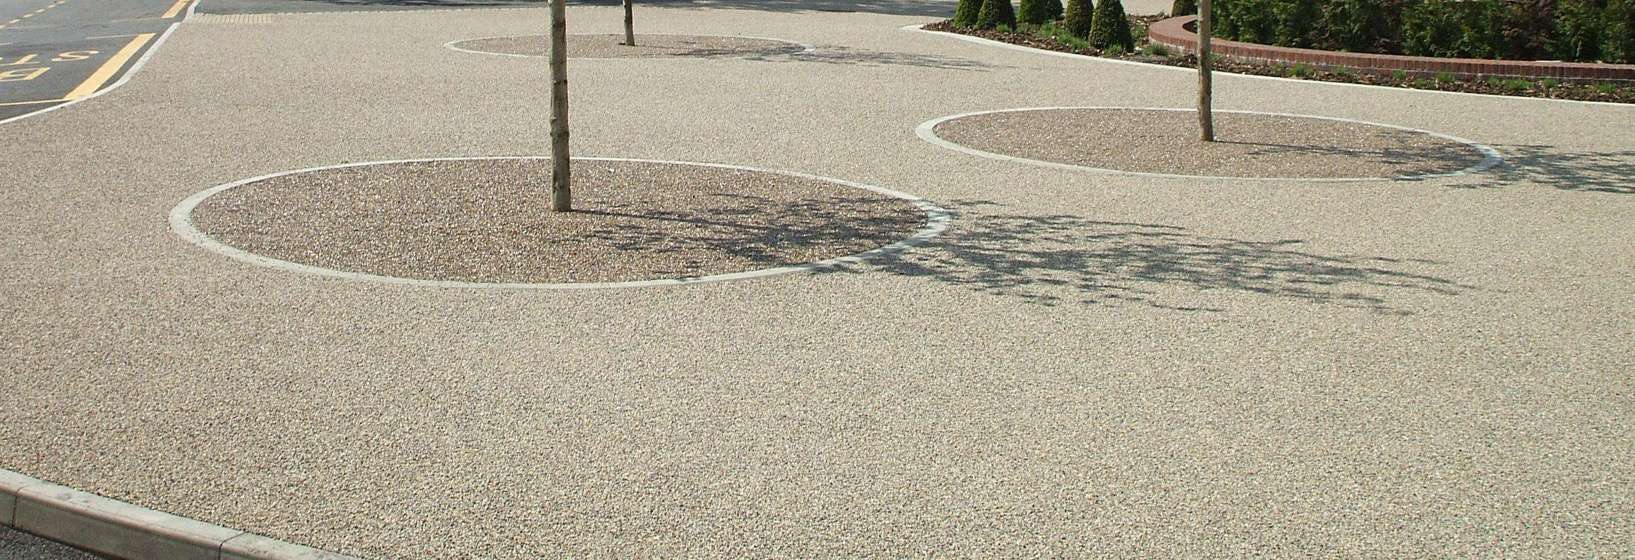 CORE BOUND - Resin Bound Aggregate Paving